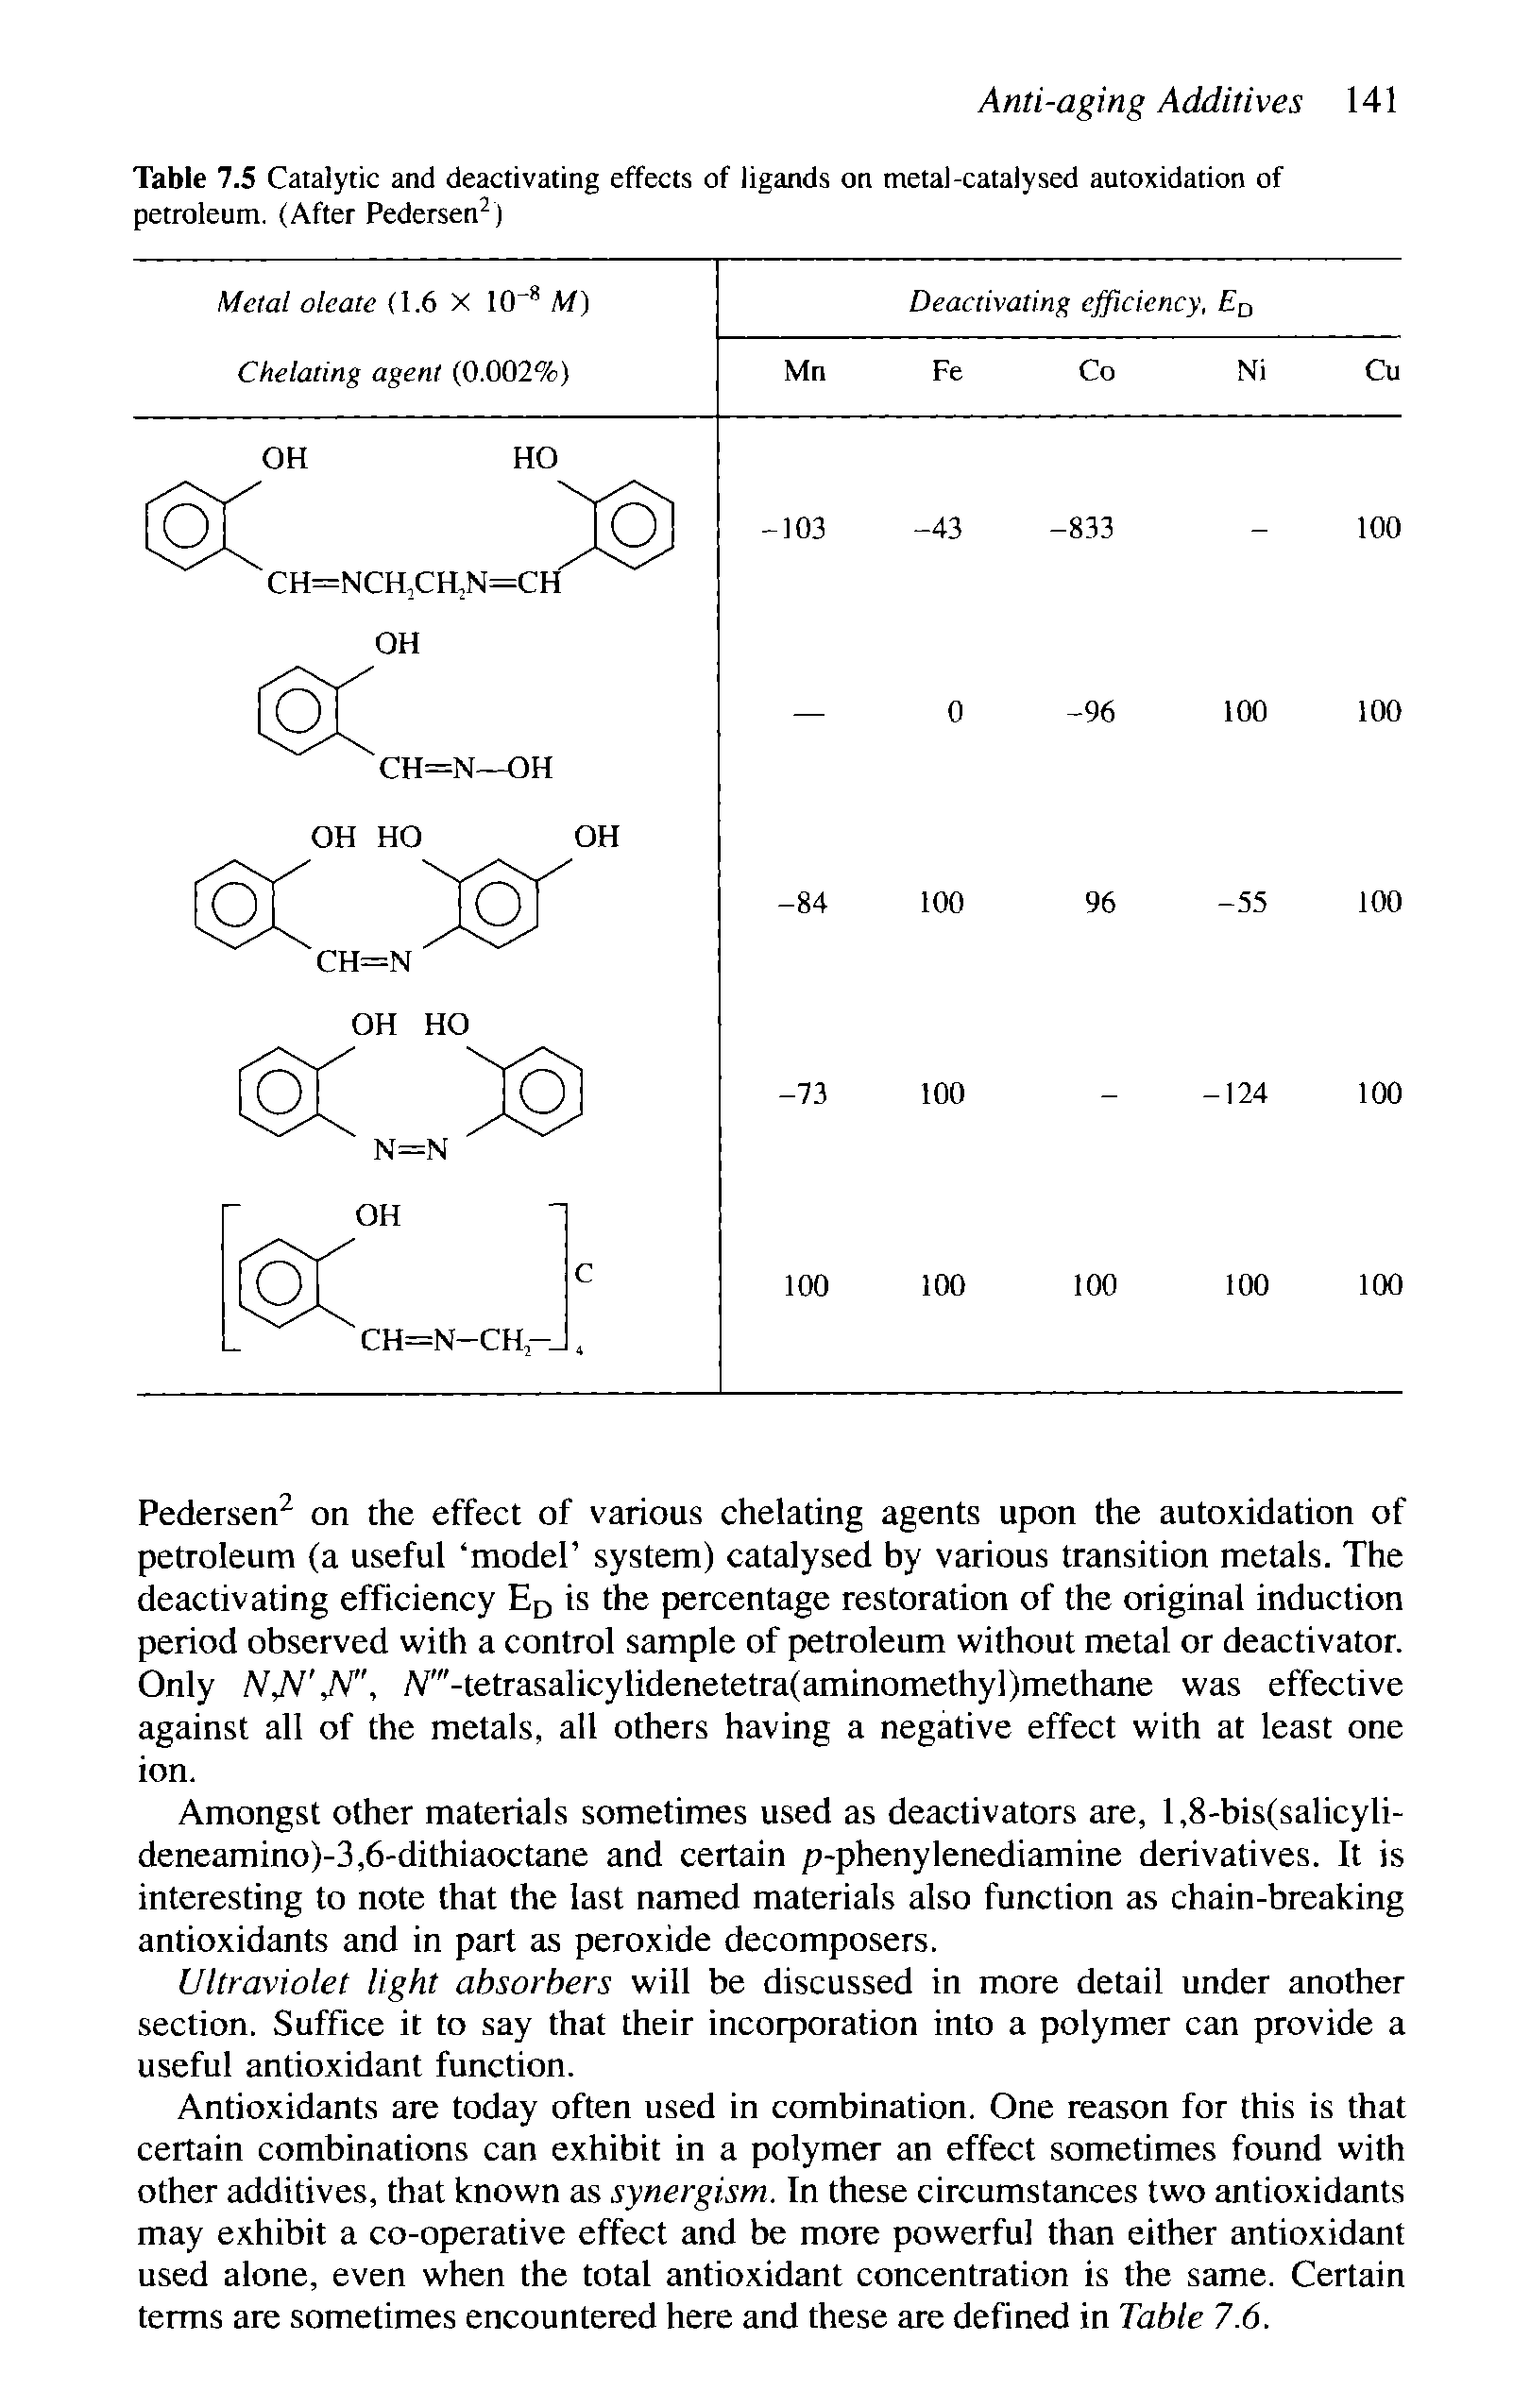 Table 7.5 Catalytic and deactivating effects of ligands on metal-catalysed autoxidation of petroleum. (After Pedersen )...